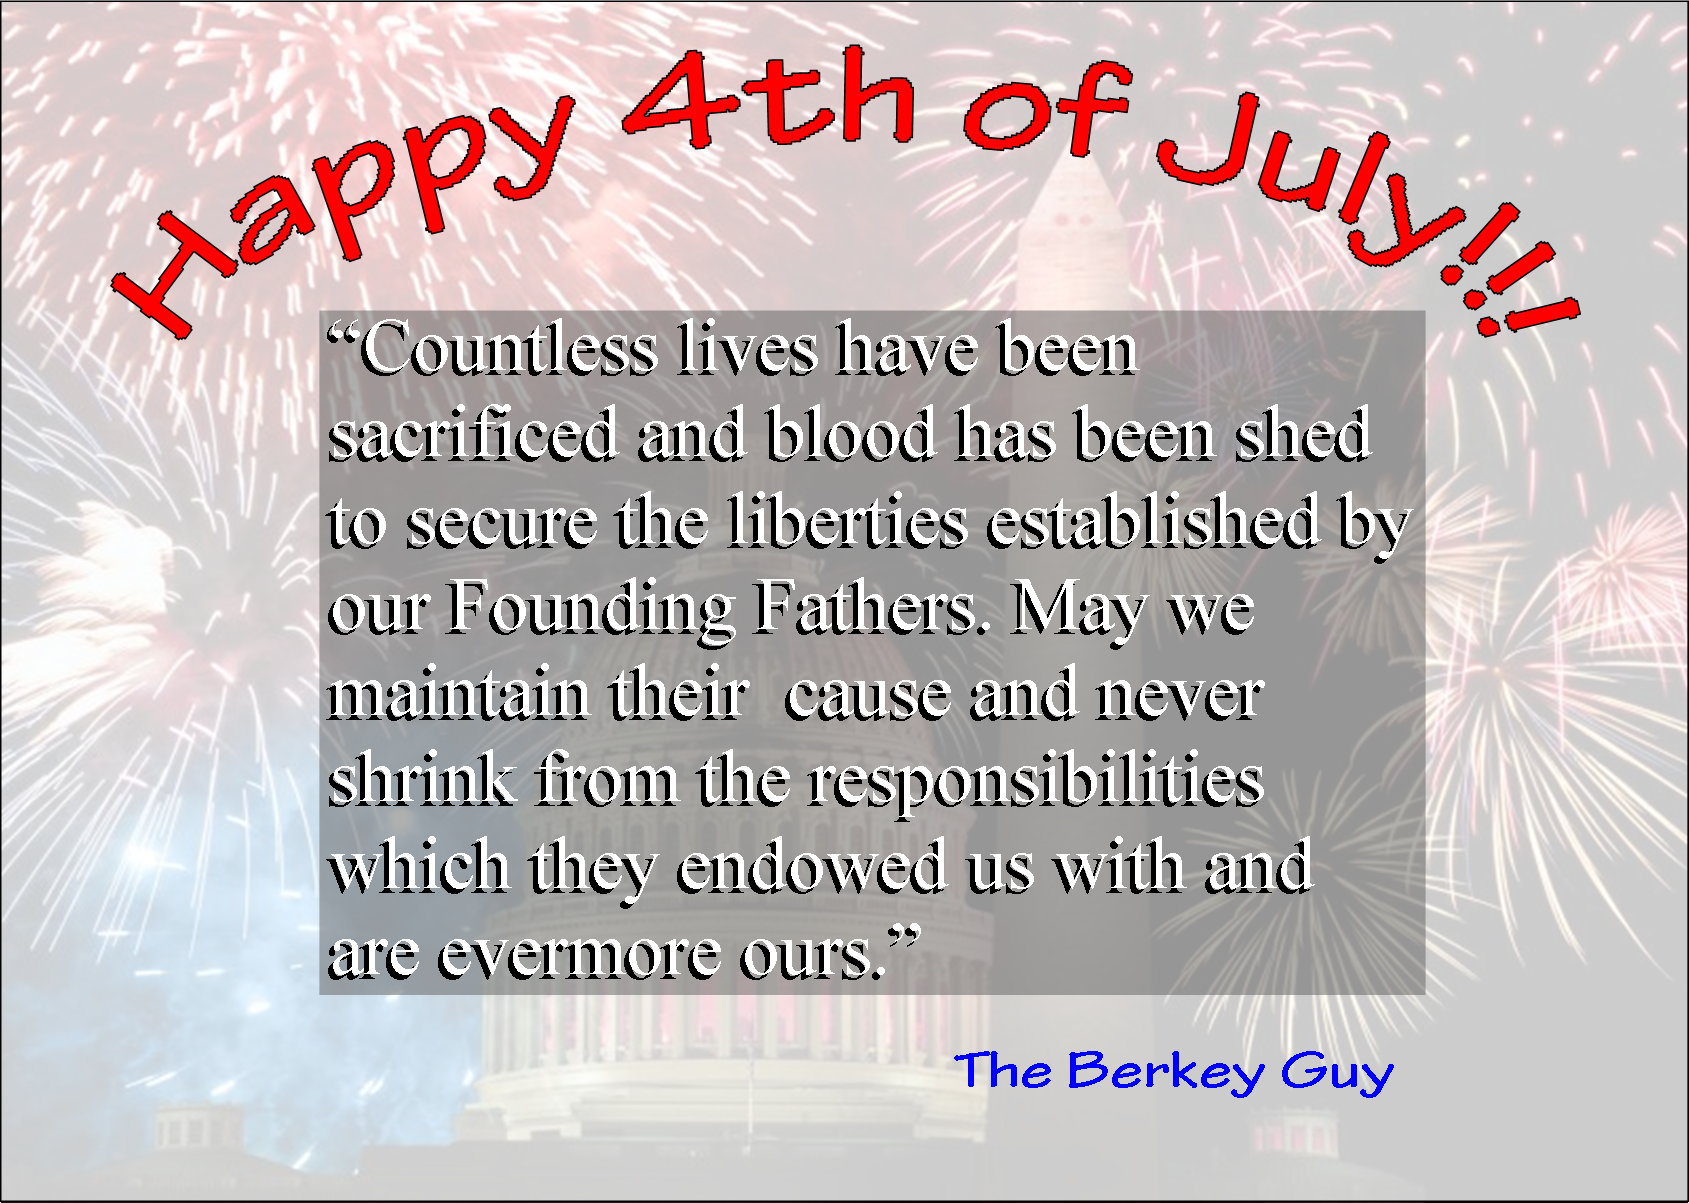 Happy American Independence Day!!!